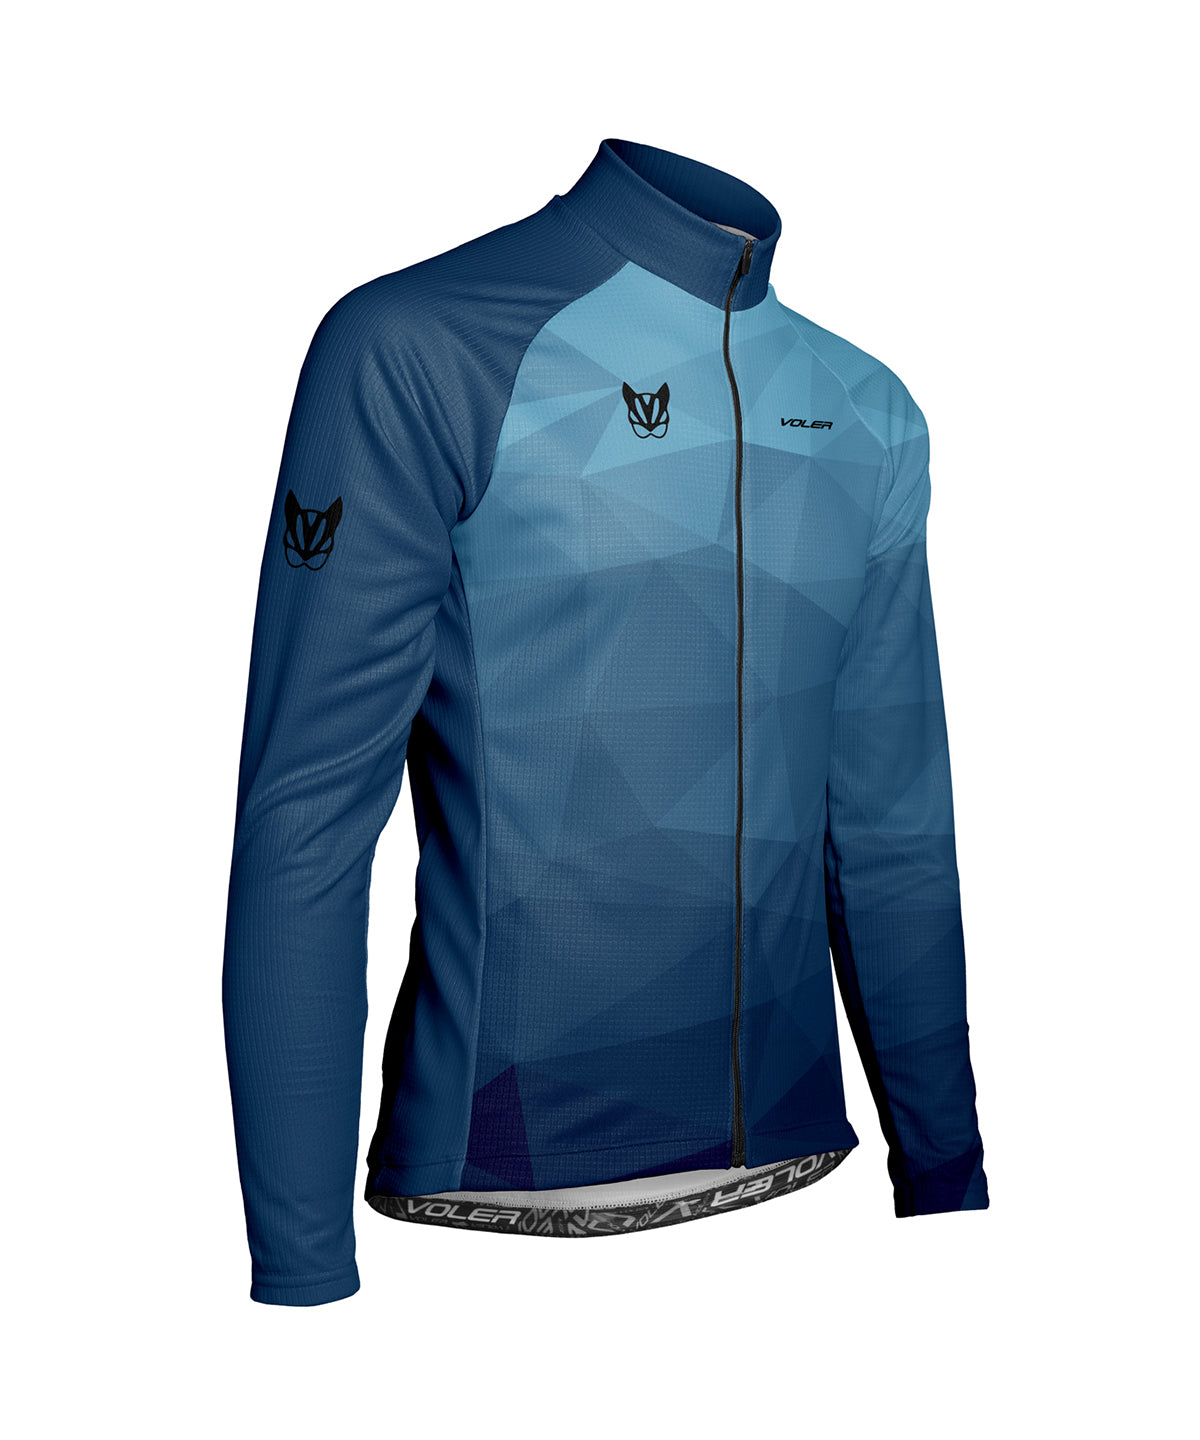 M. PELOTON THERMAL JERSEY - KELLY CATALE '24